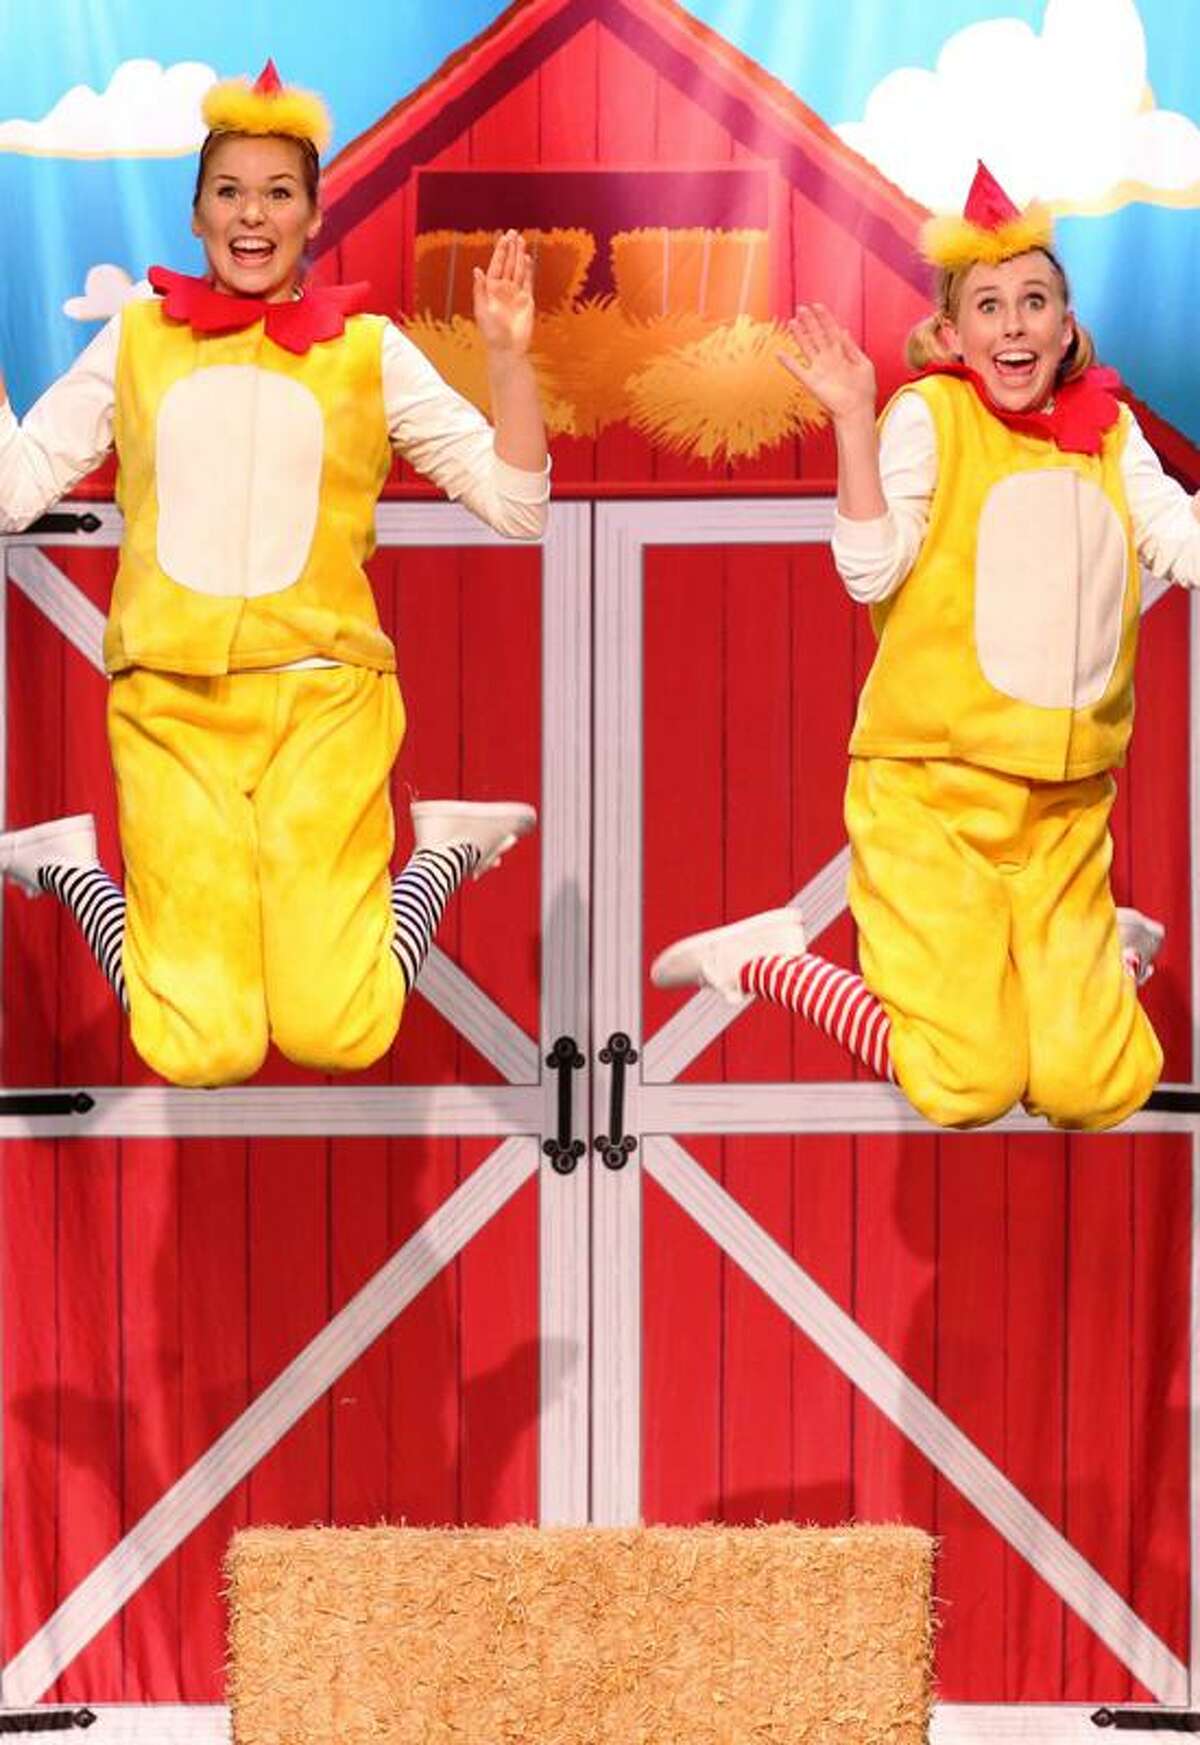 Chicken Dance: Marge and Lola will be staged on March 28 at 2 p.m. at the Ridgefield Playhouse, 80 East Ridge Road, Ridgefield. Tickets are $20. For more information, visit ridgefieldplayhouse.org.